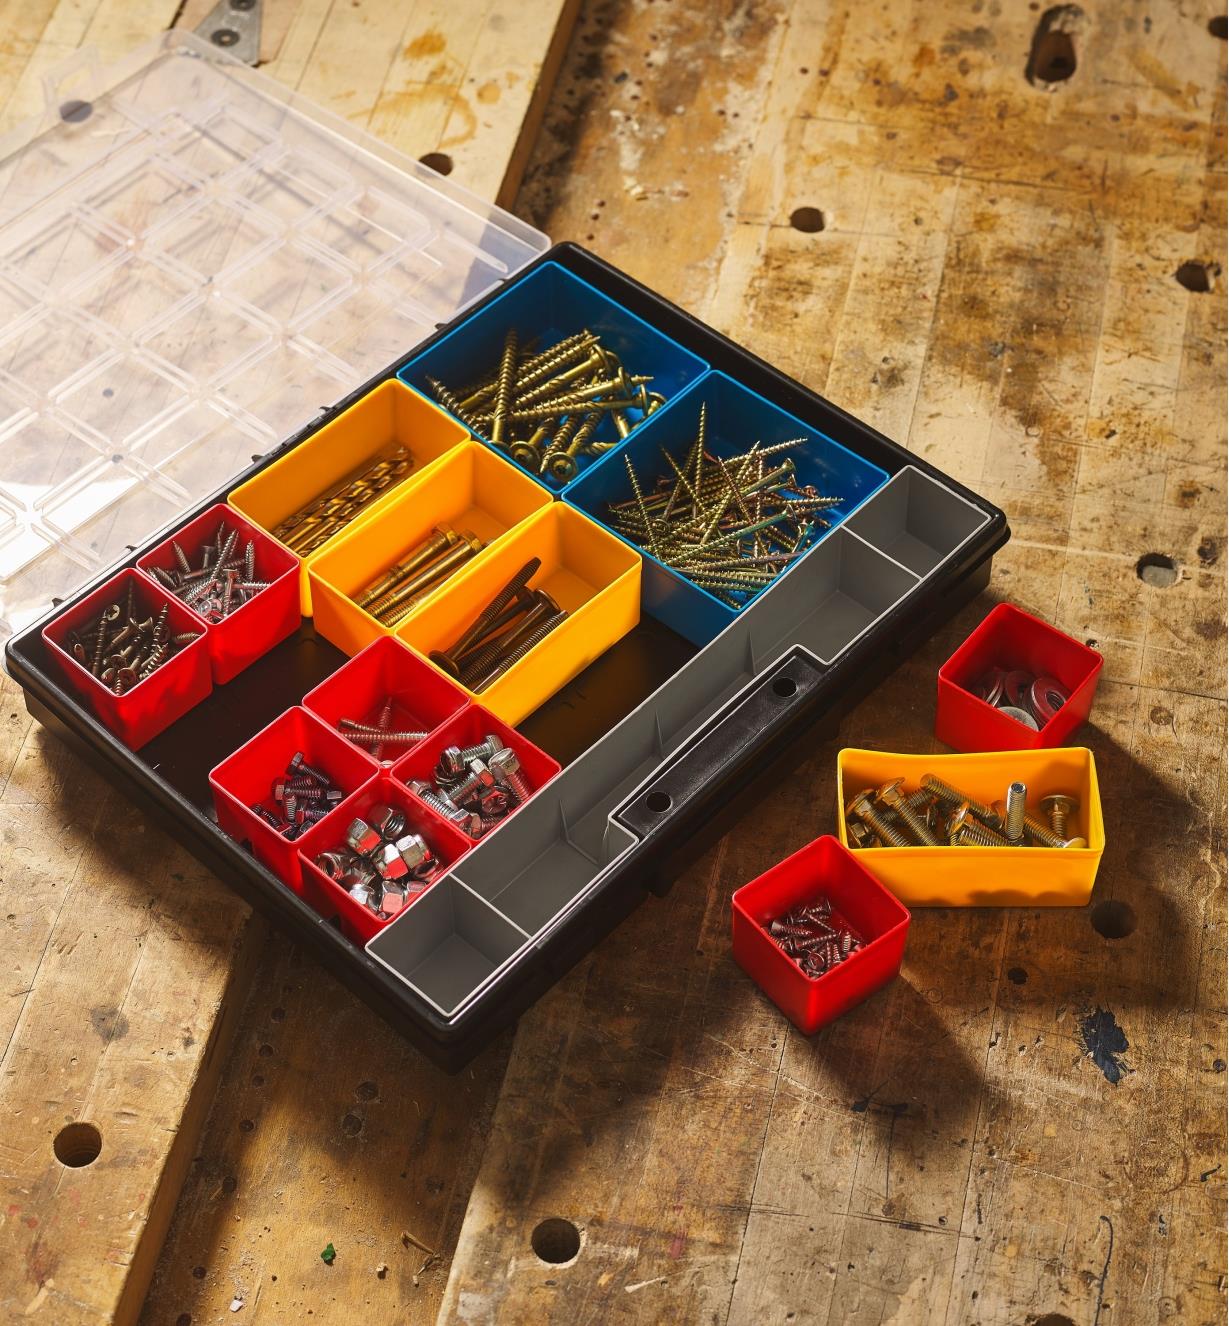 Various fasteners fill the removable bins from the Allit economy modular storage case